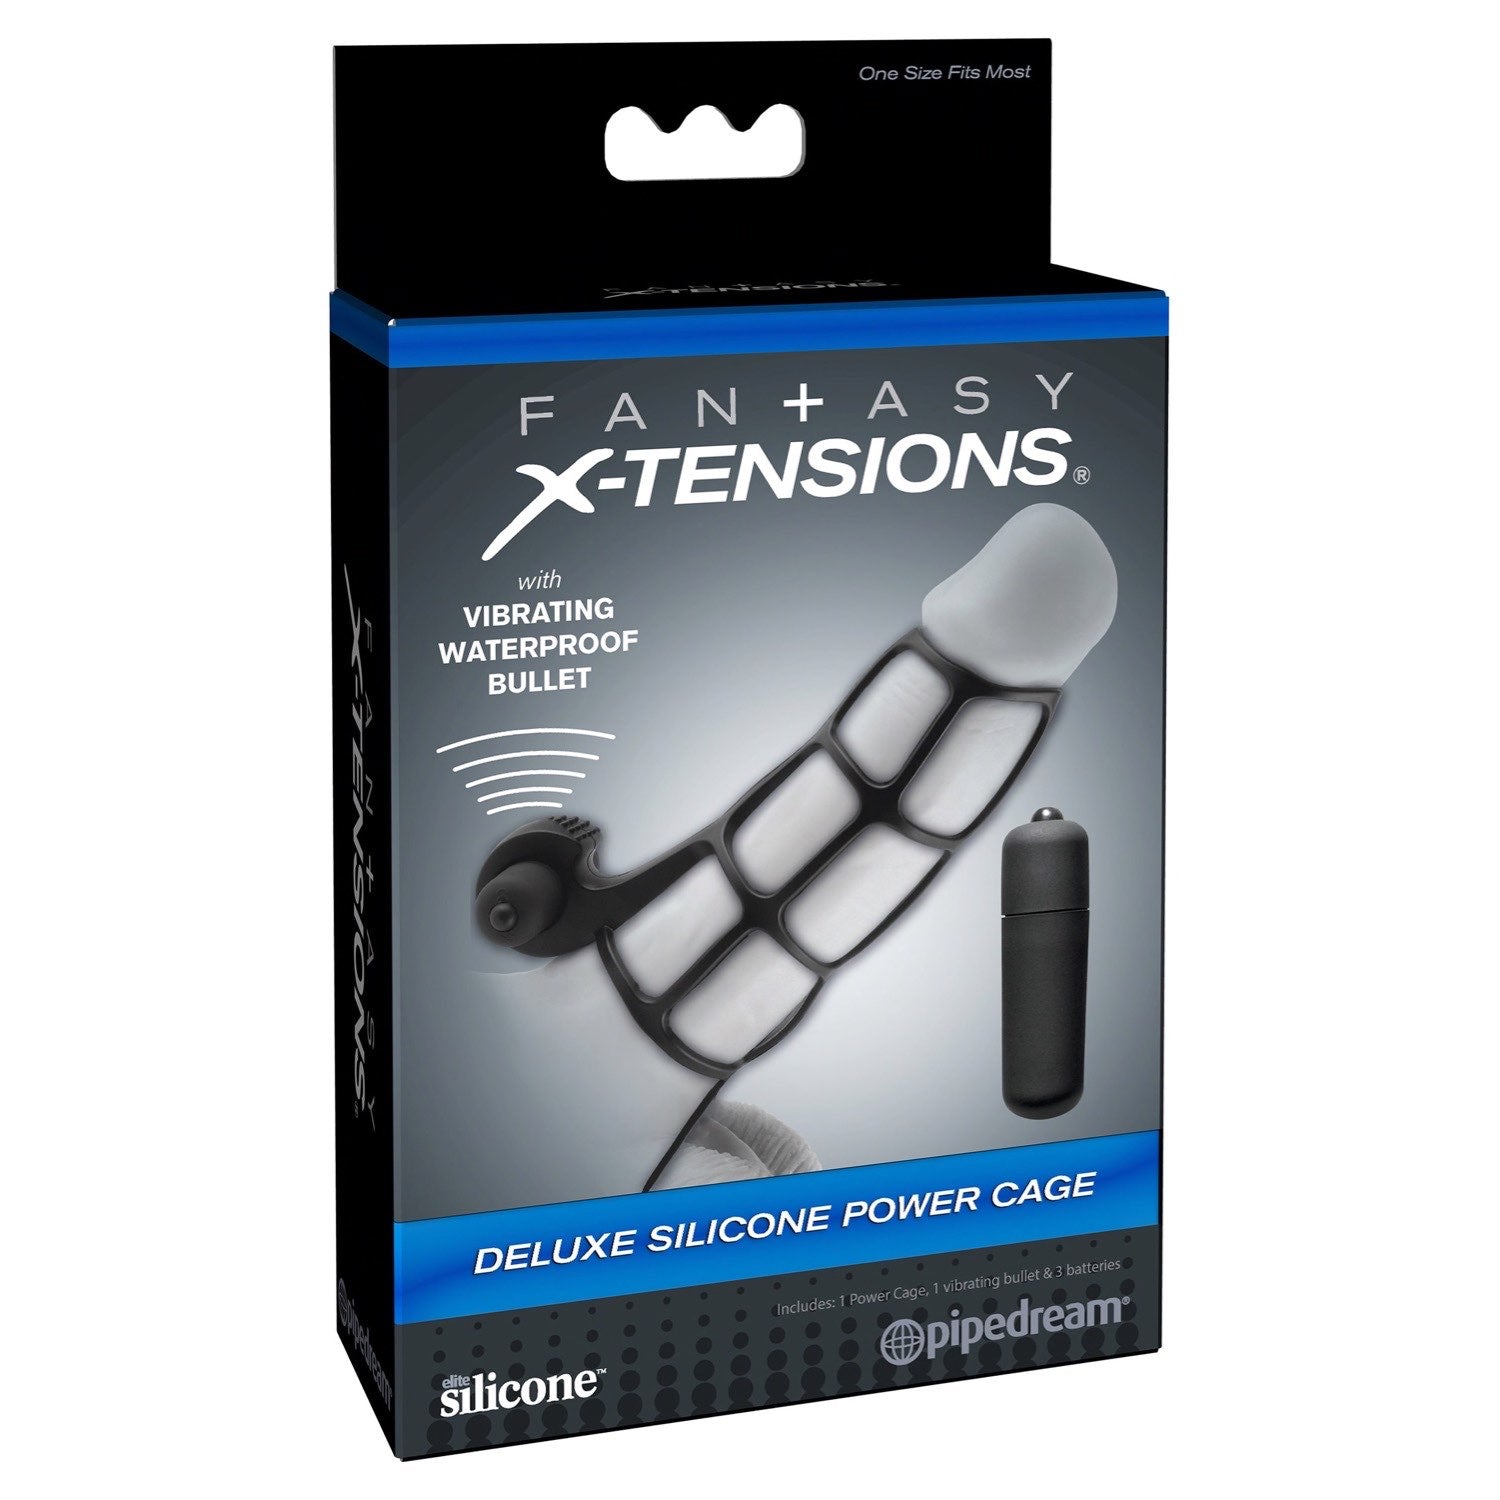 Fantasy X-Tensions Deluxe Silicone Power Cage - Black Penis Sleeve with Ball Strap &amp; Vibrating Clit Stimulator by Pipedream